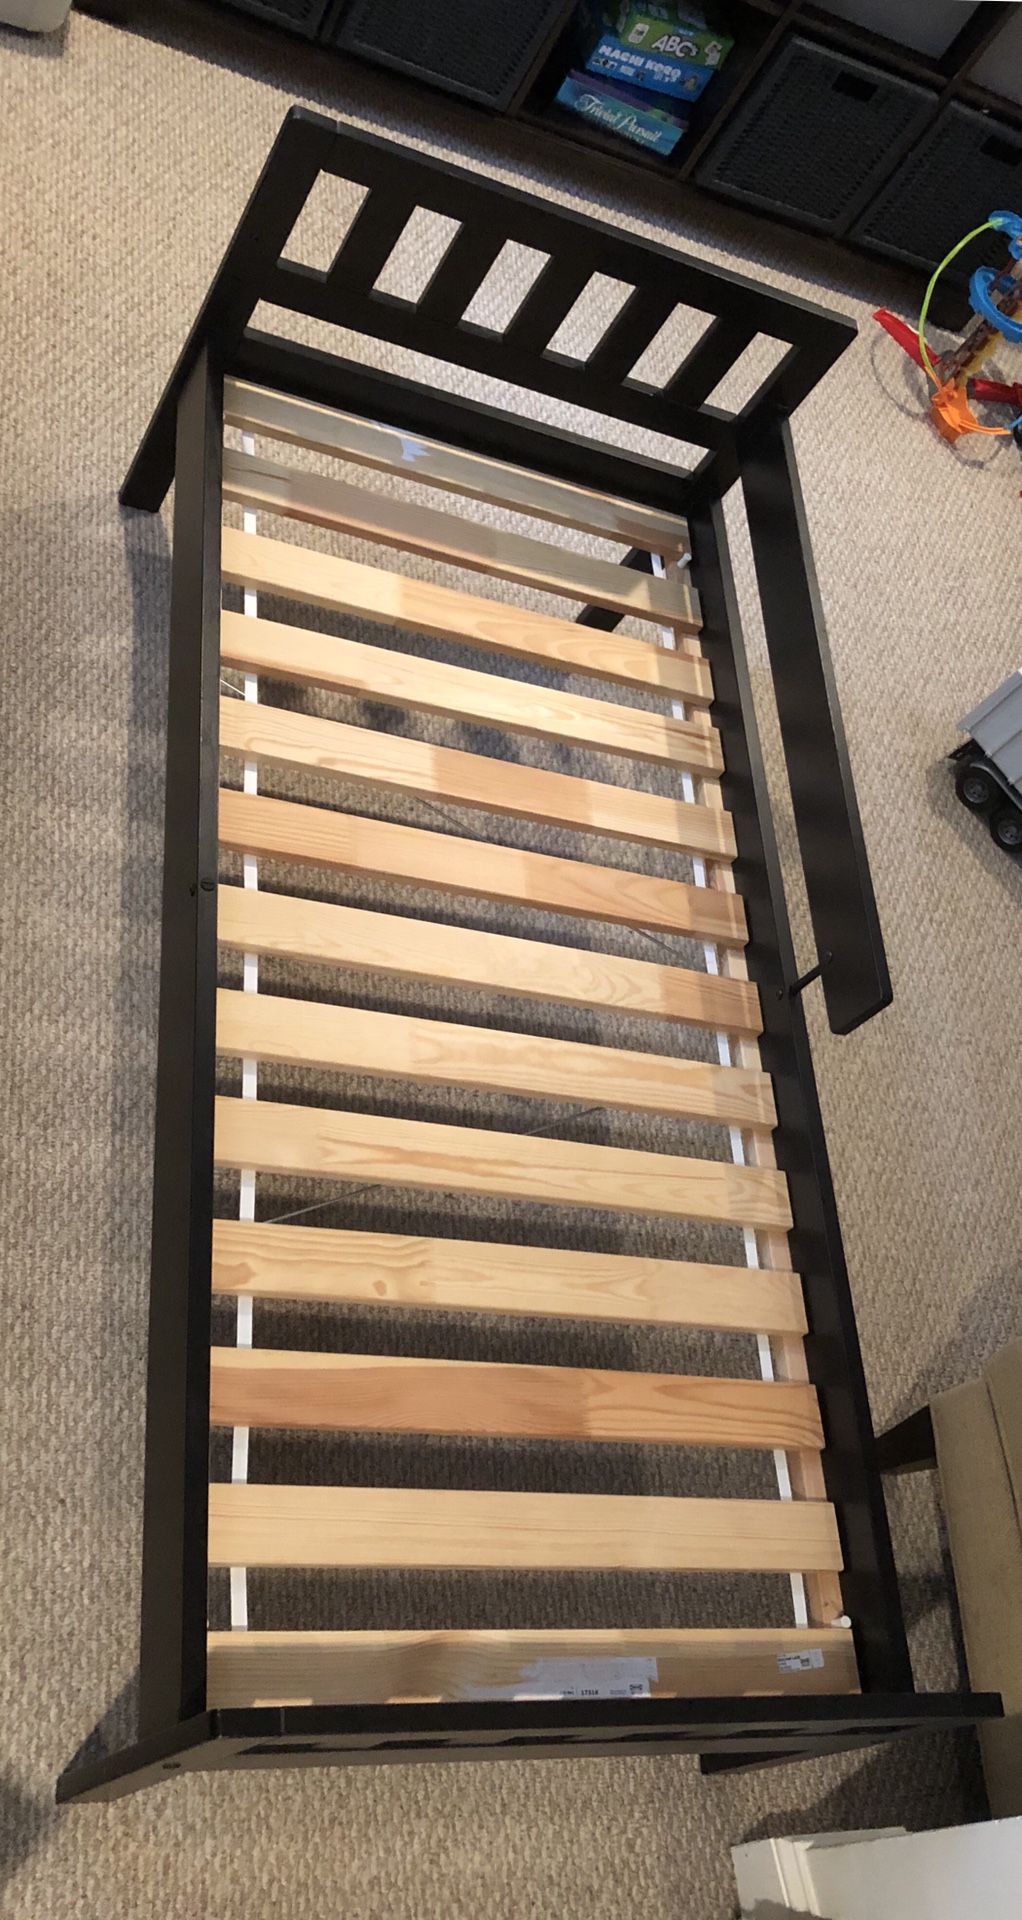 IKEA toddler bed